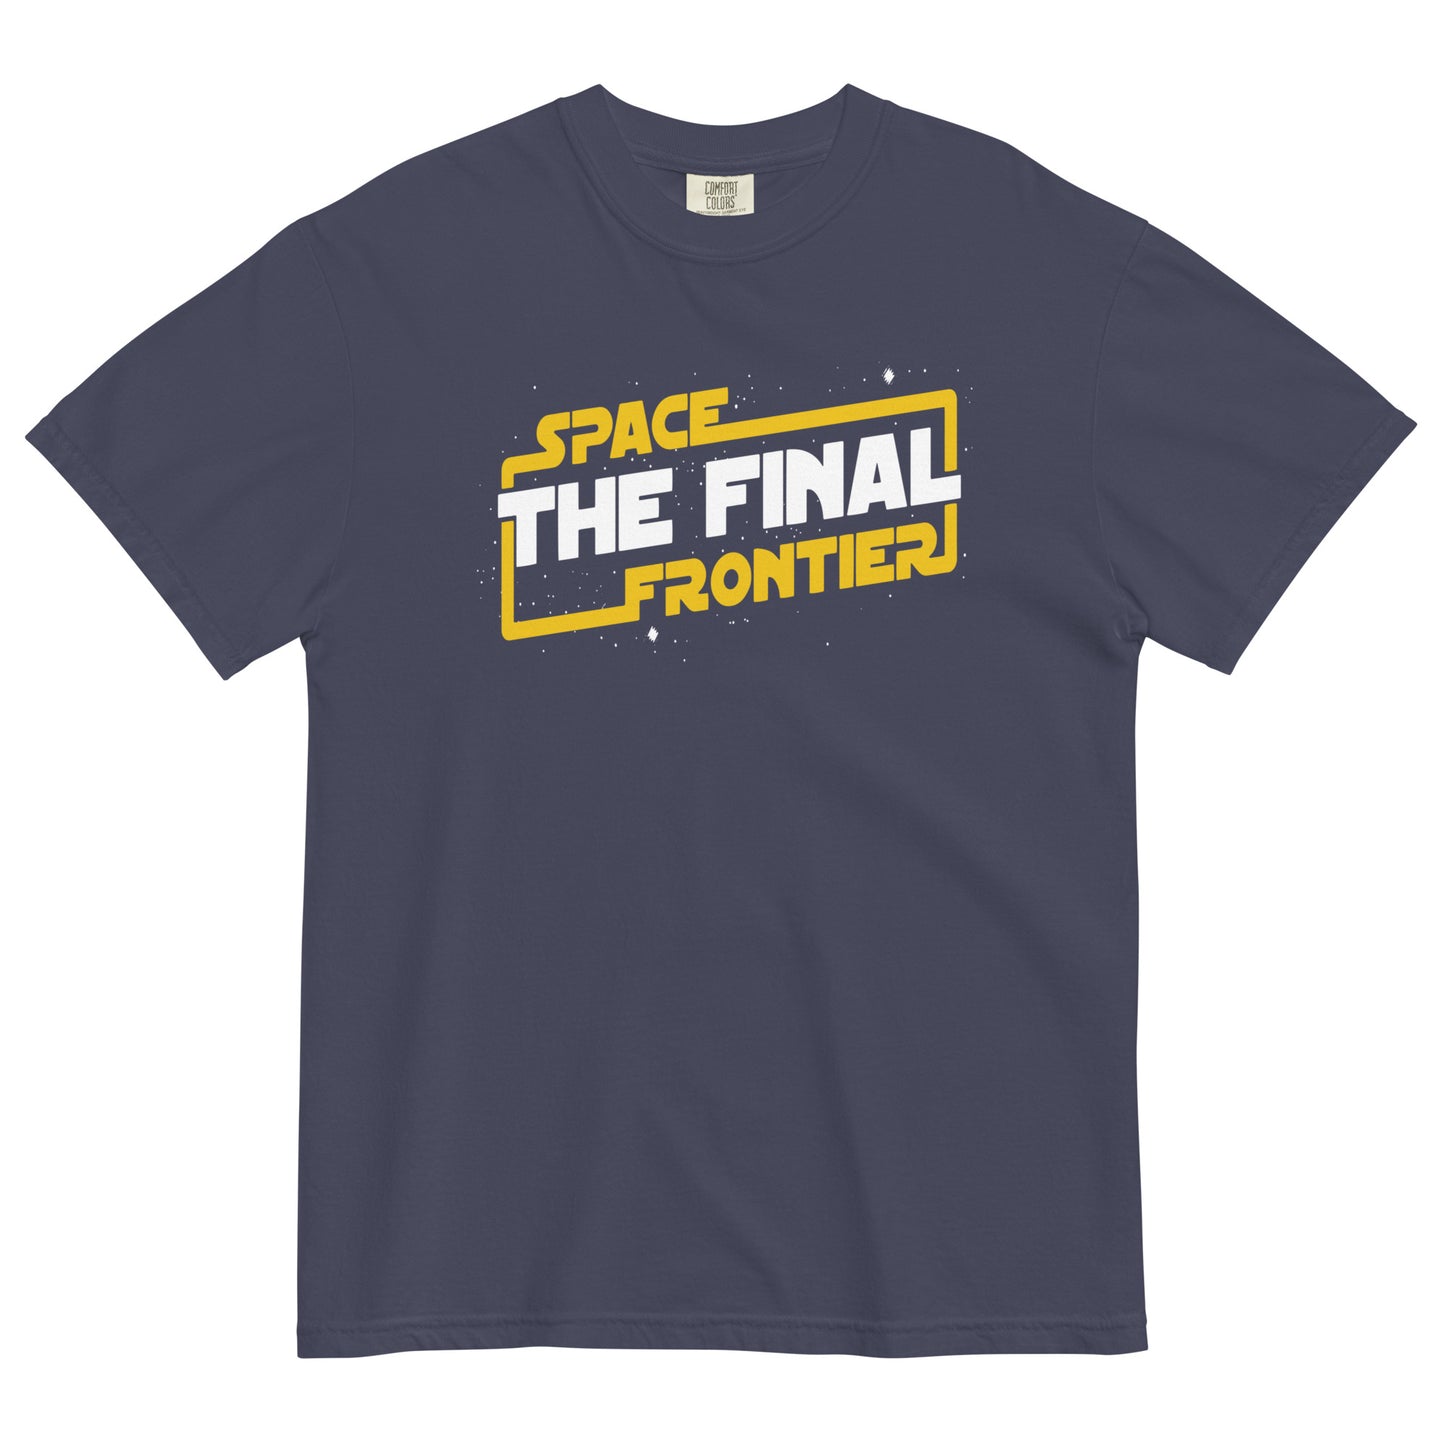 Space The Final Frontier Men's Relaxed Fit Tee